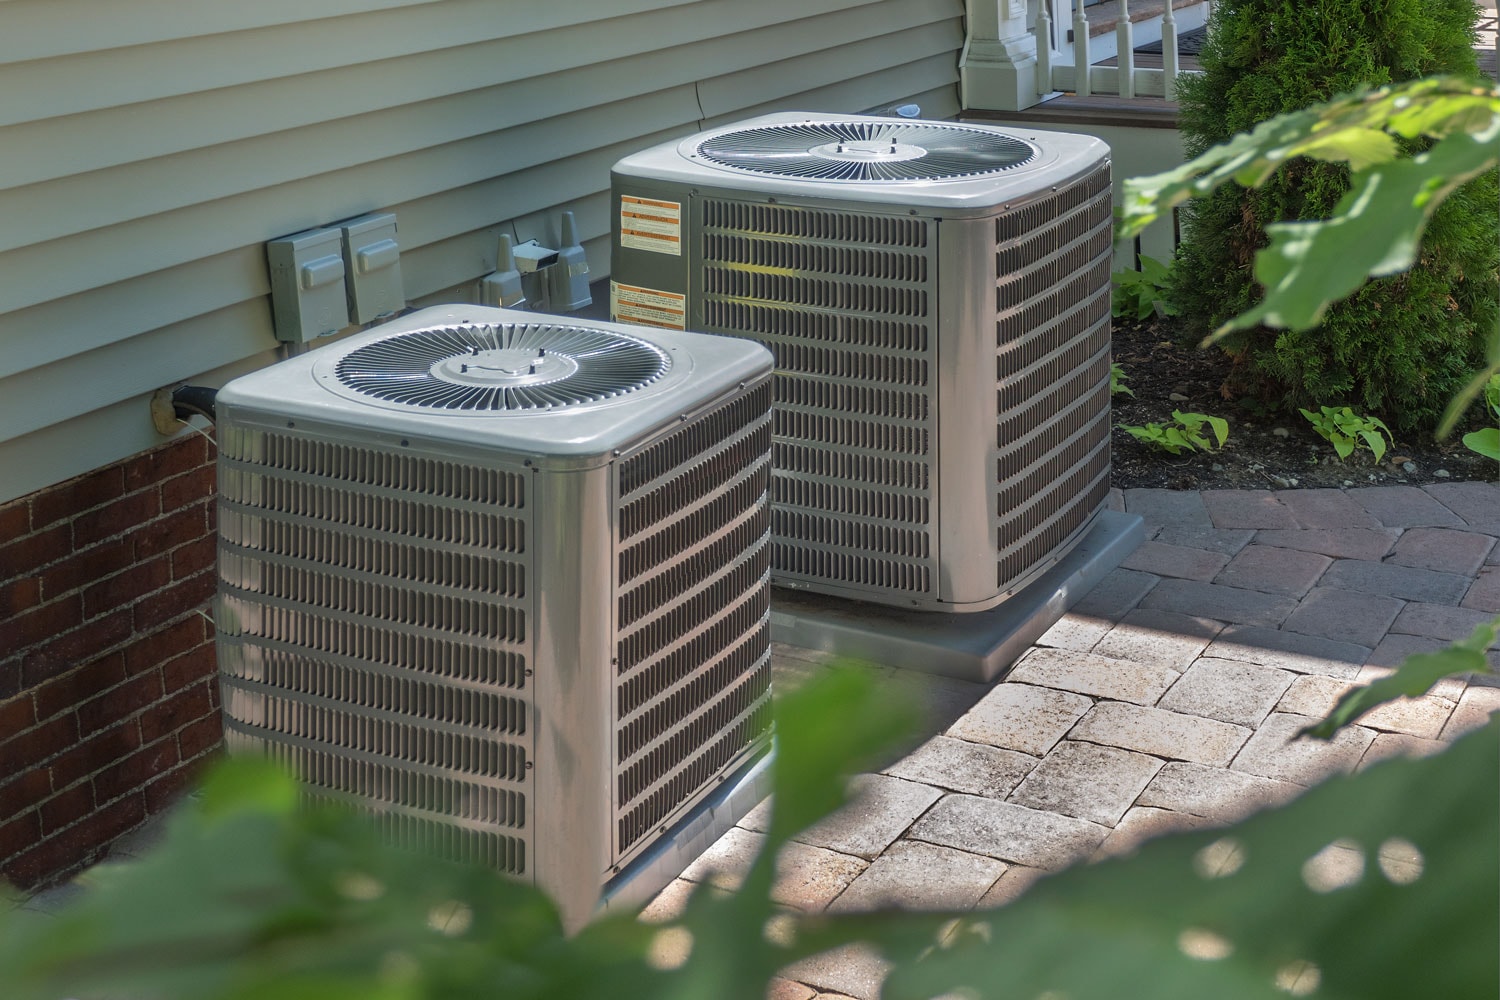 Increased overall perfomance may matter on how you landscape it around the ac unit